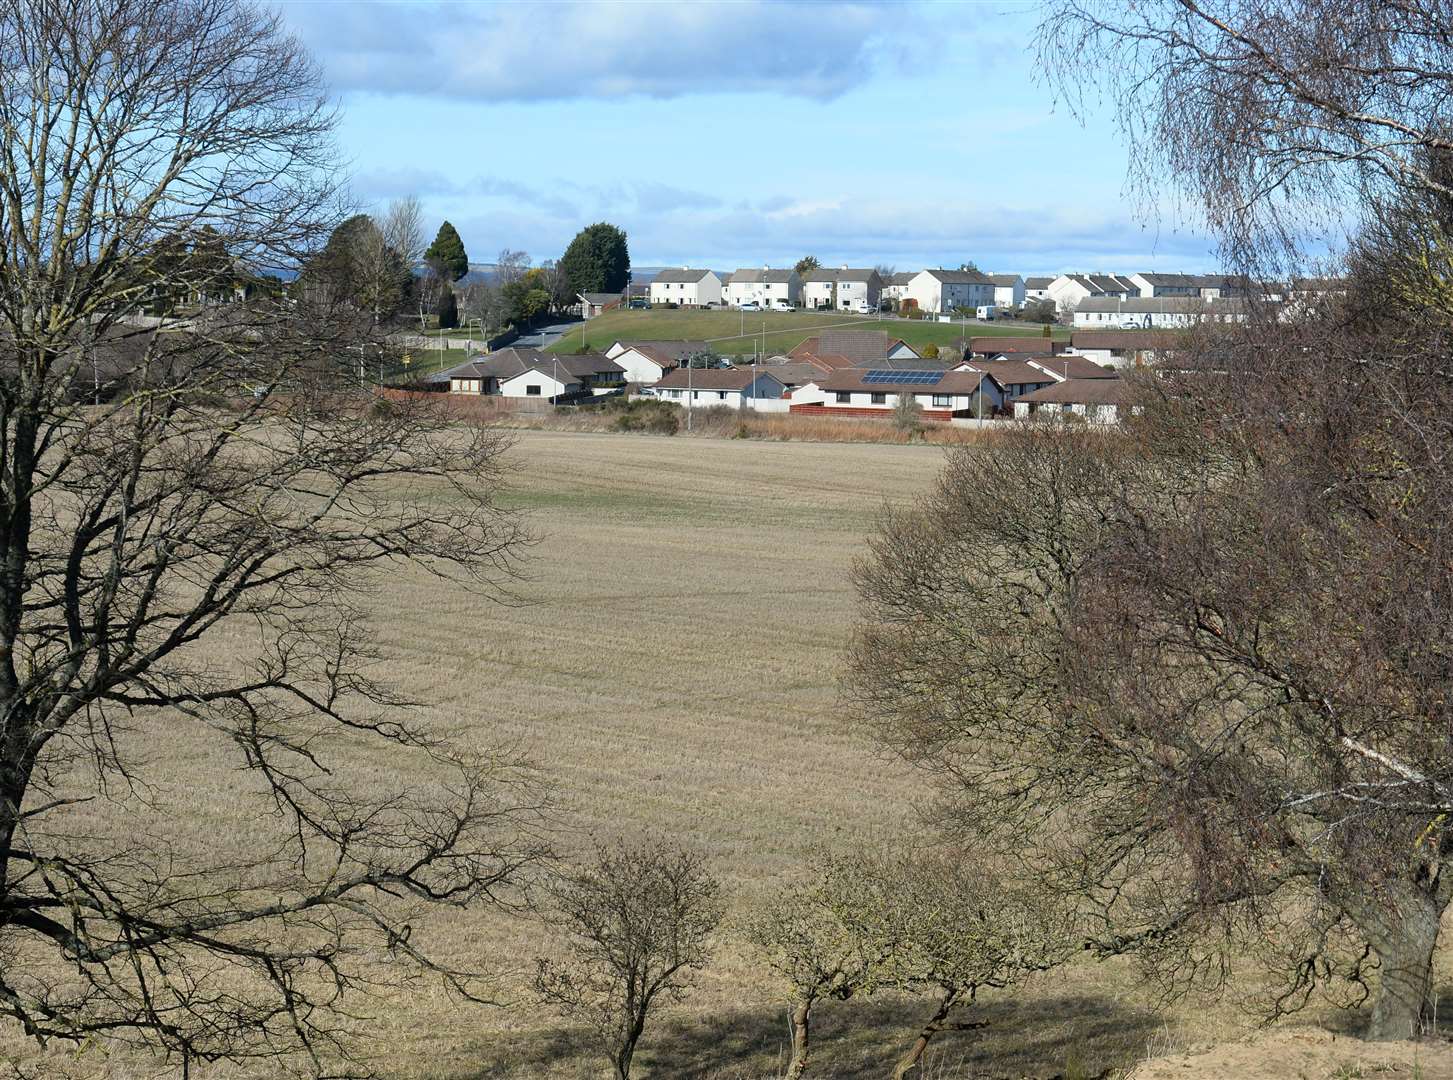 Developers Springfield plan to build more homes in Nairn.